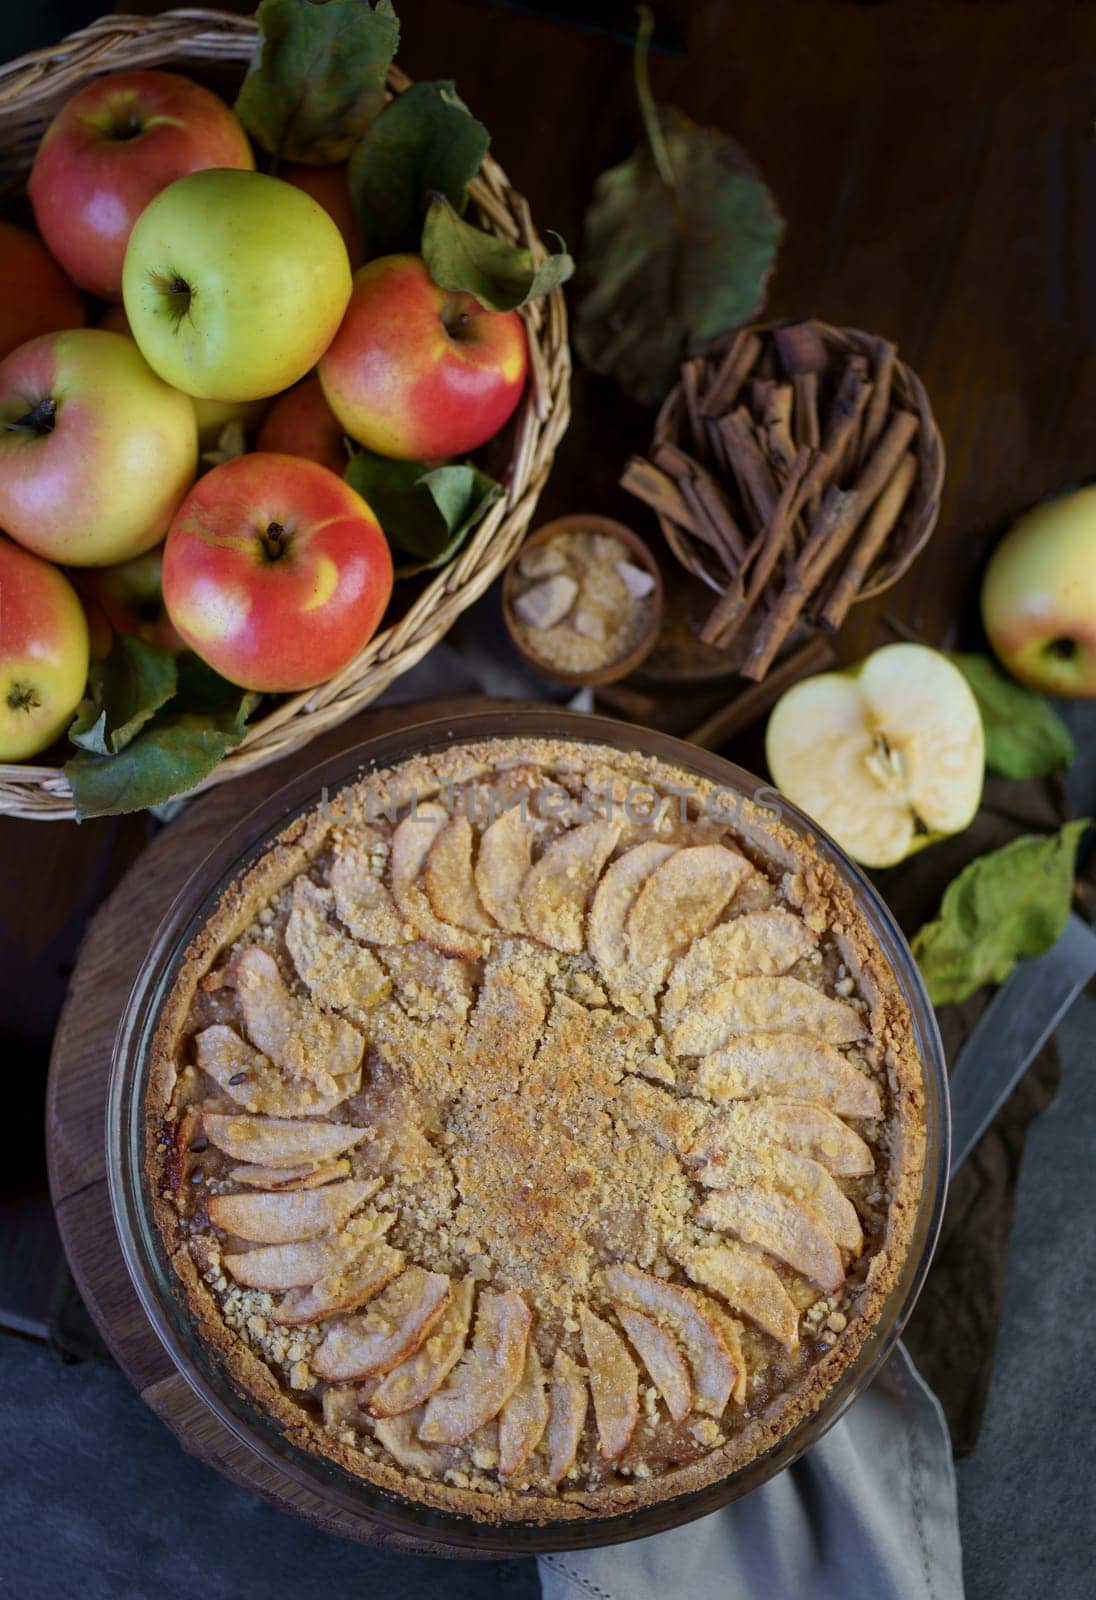 apple pie with fresh fruits on a wooden table by aprilphoto